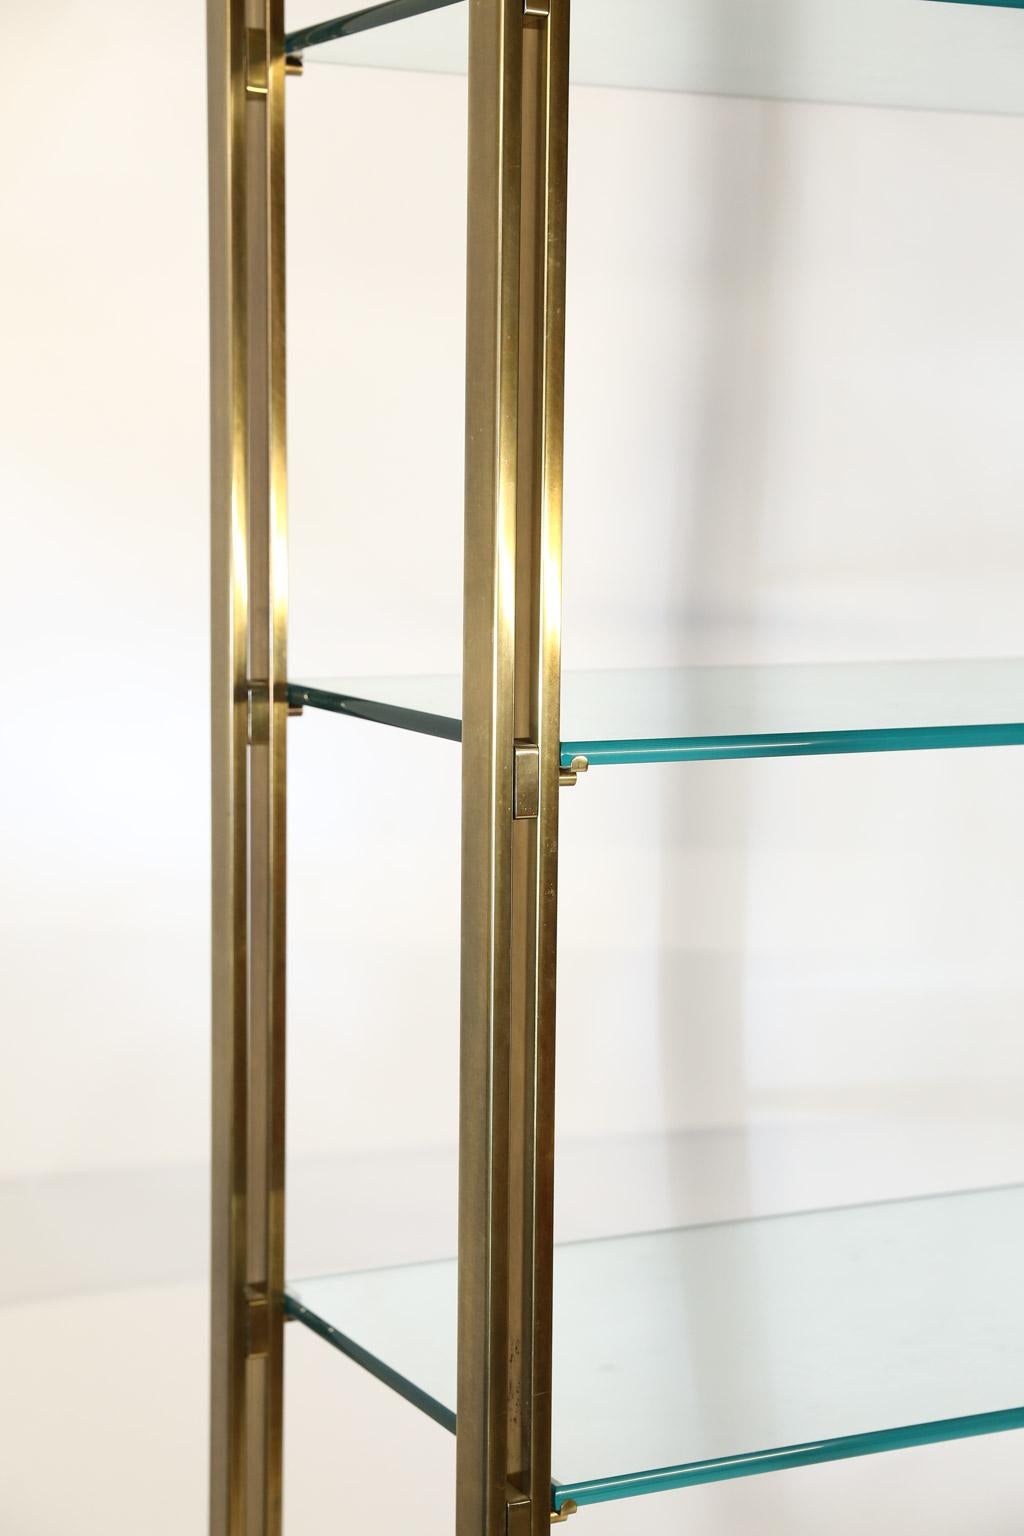 This is a beautiful Mid-Century Modern brass and glass étagère which features a solid brass frame, five original glass shelves plus a sixth original glass shelf as the top. The étagère is in original condition with normal wear from age and use. The